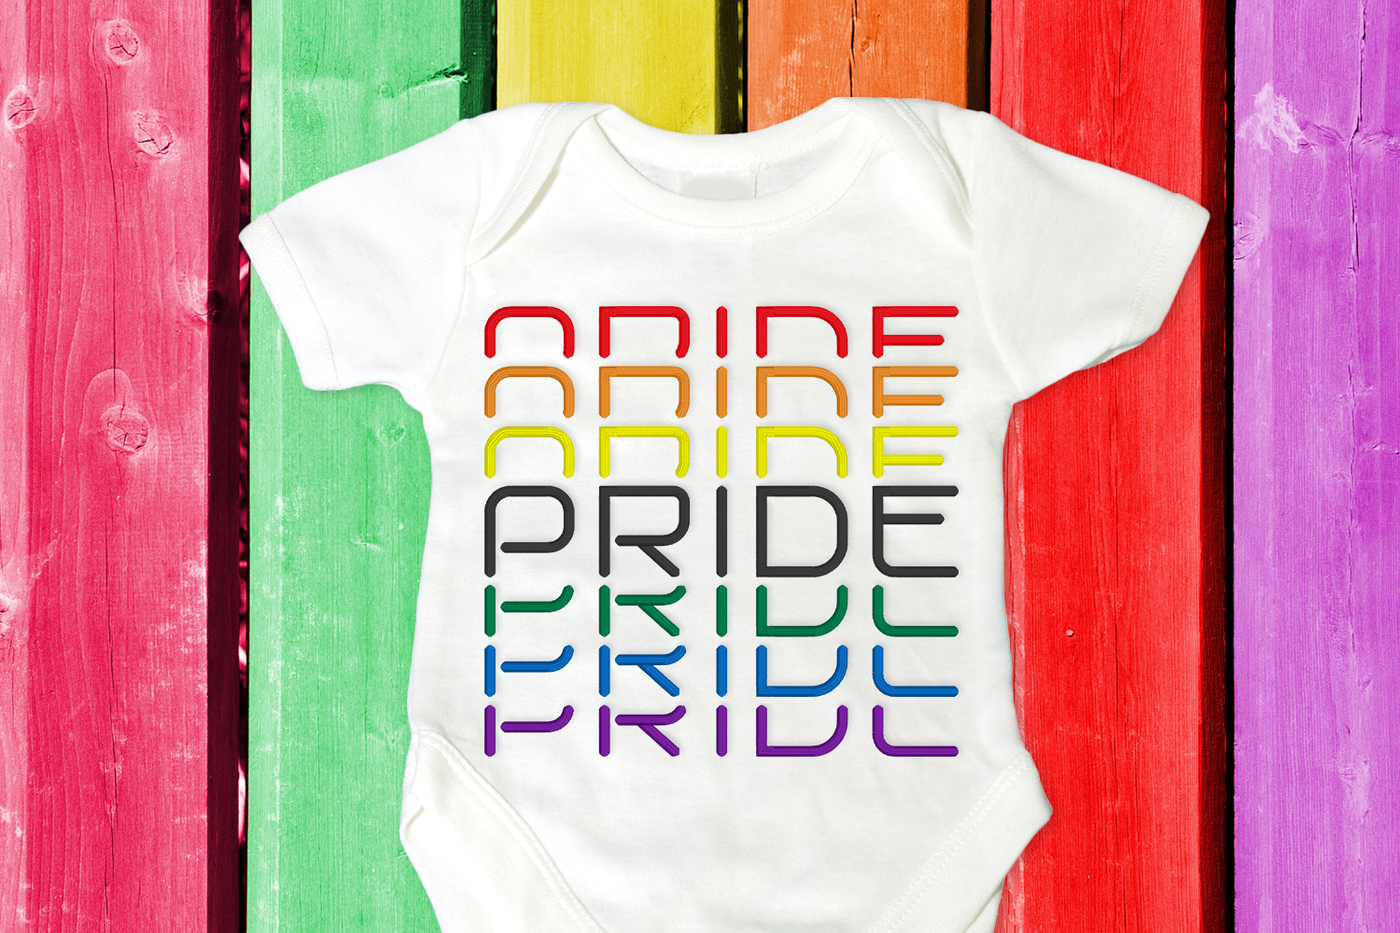 Stacked Pride embroidery design shown stitched on a white onesie on a rainbow painted wood background.